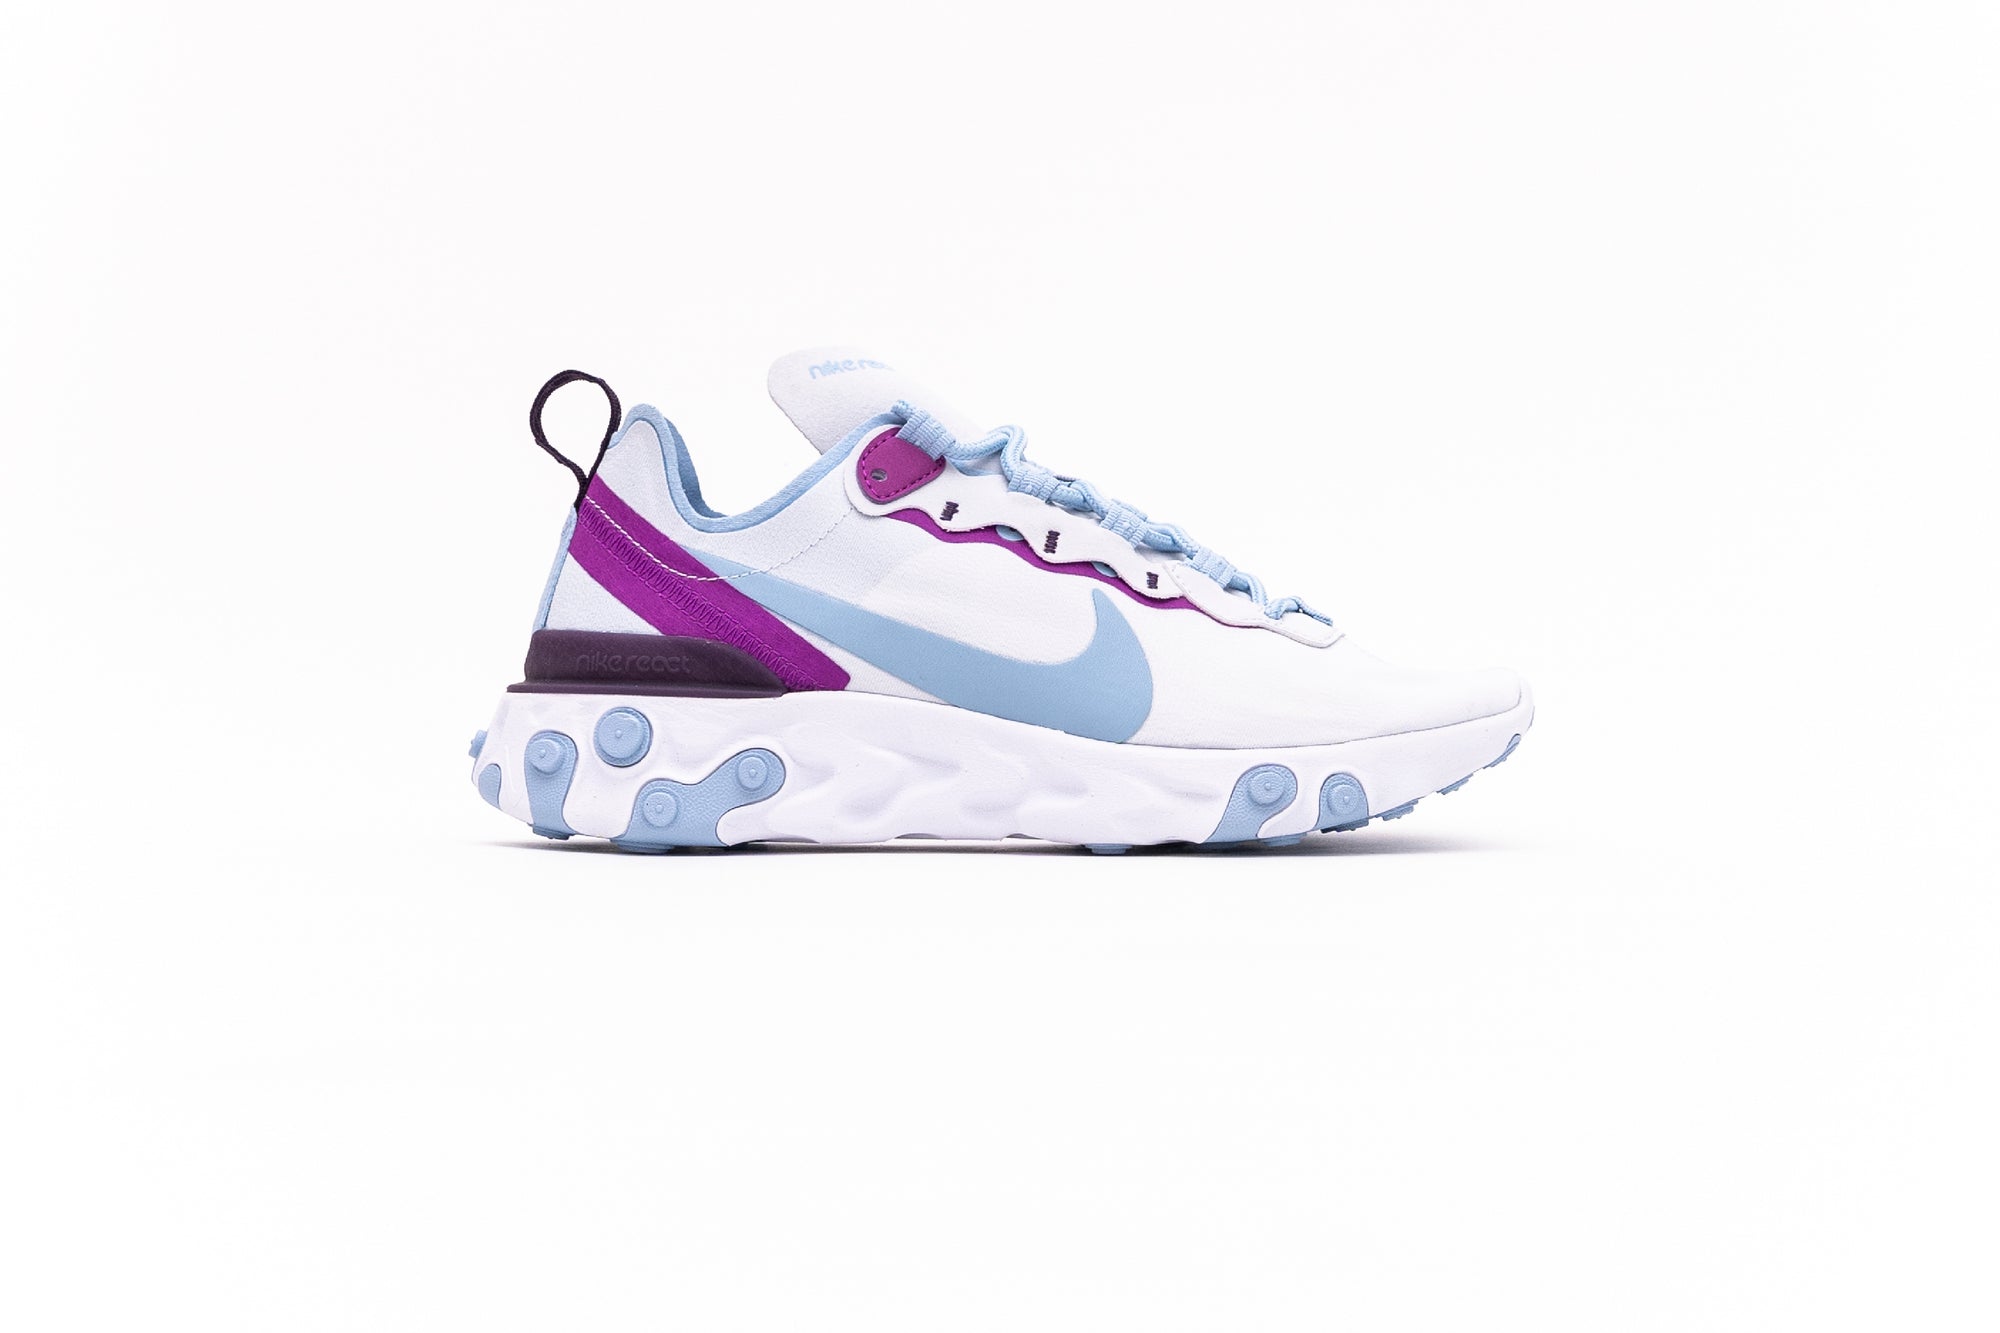 WMNS Nike React Element 55 - SoleFly